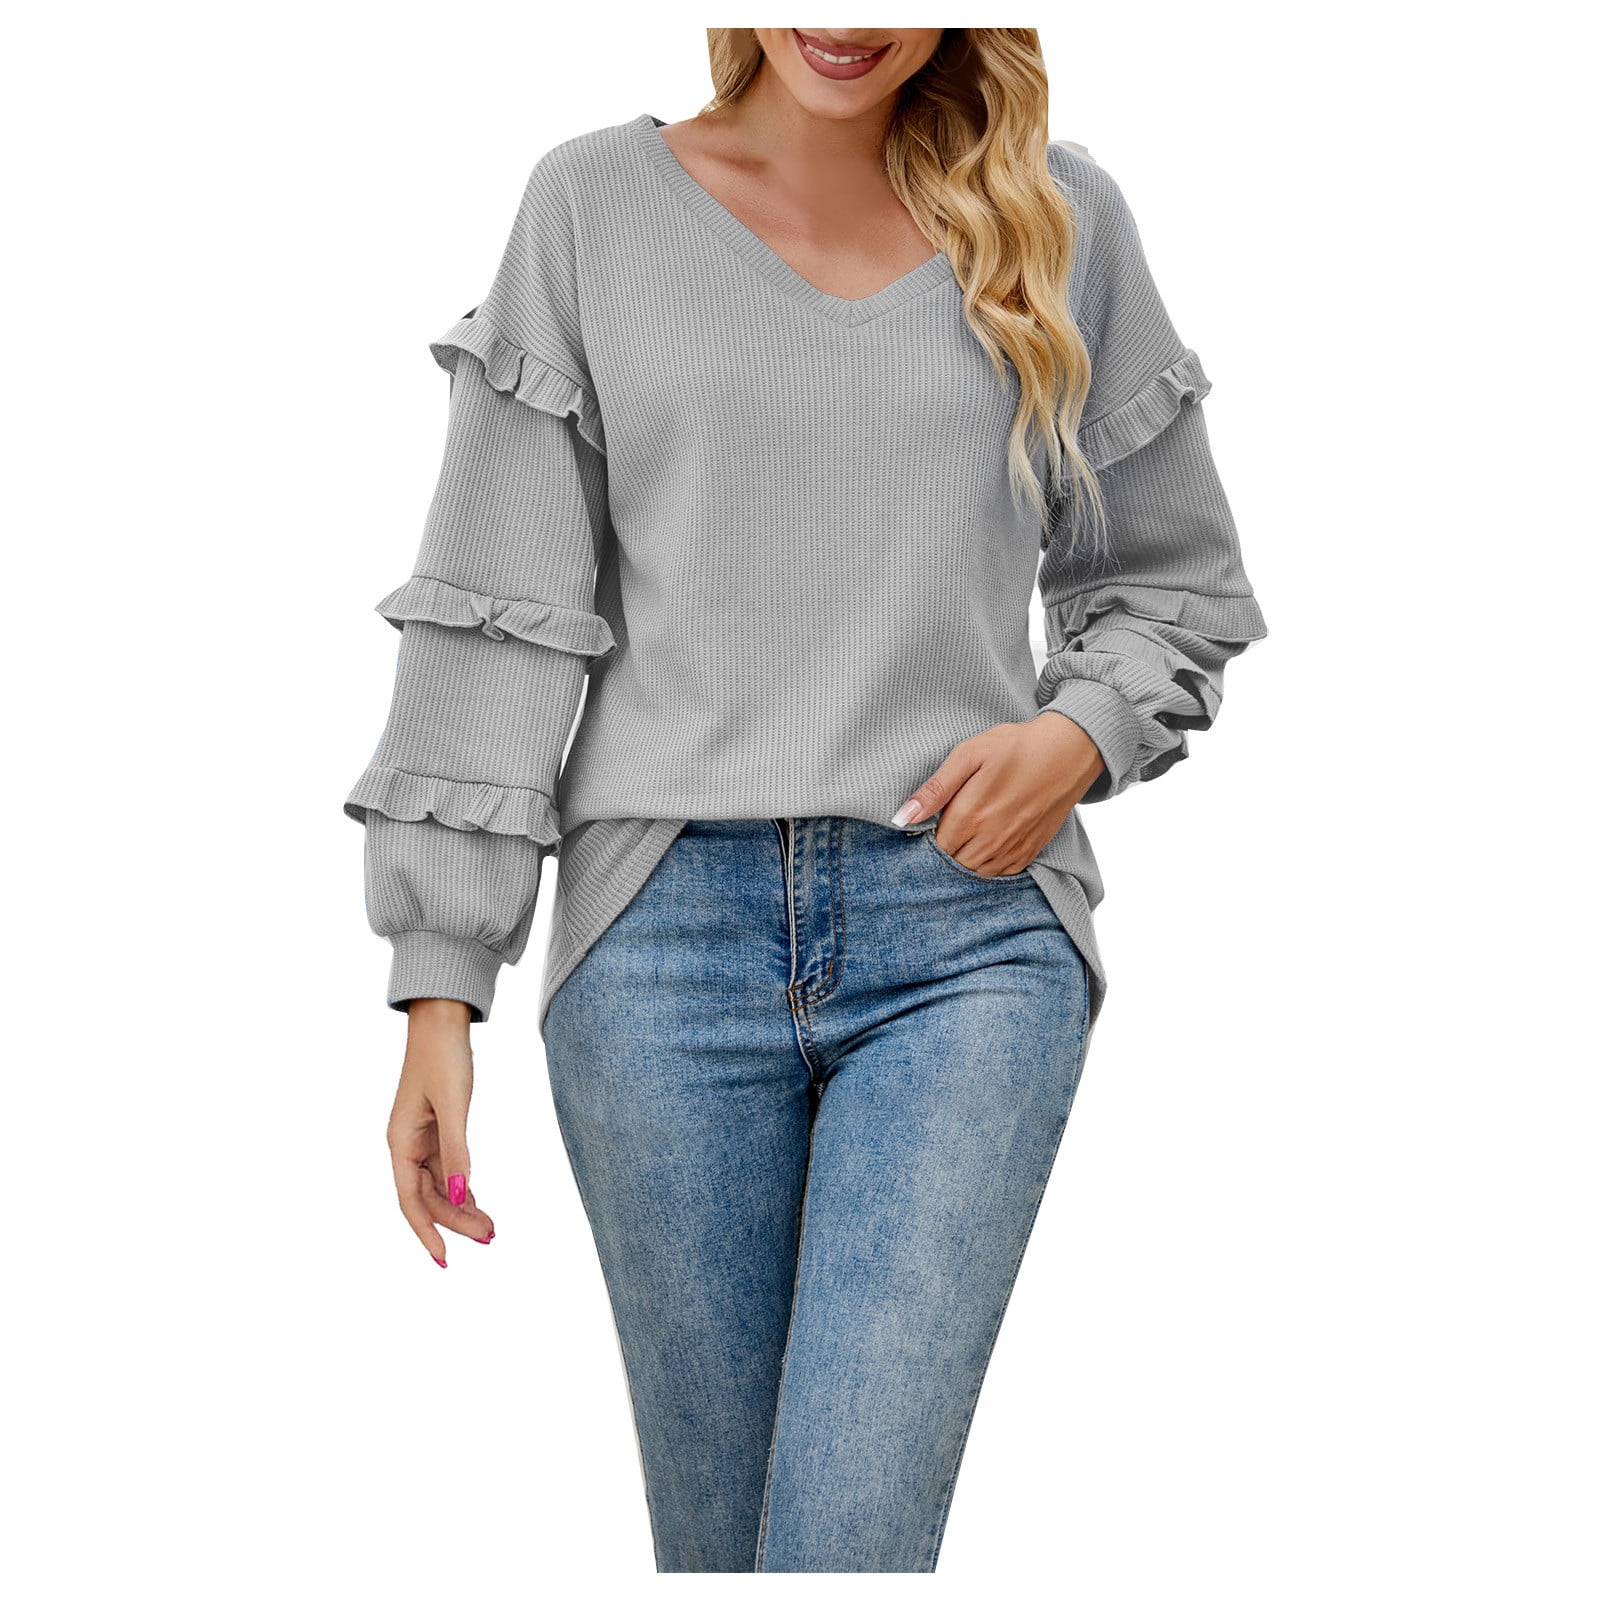 tklpehg Womens Tops Dressy Casual Solid Color Long Sleeve Shirts